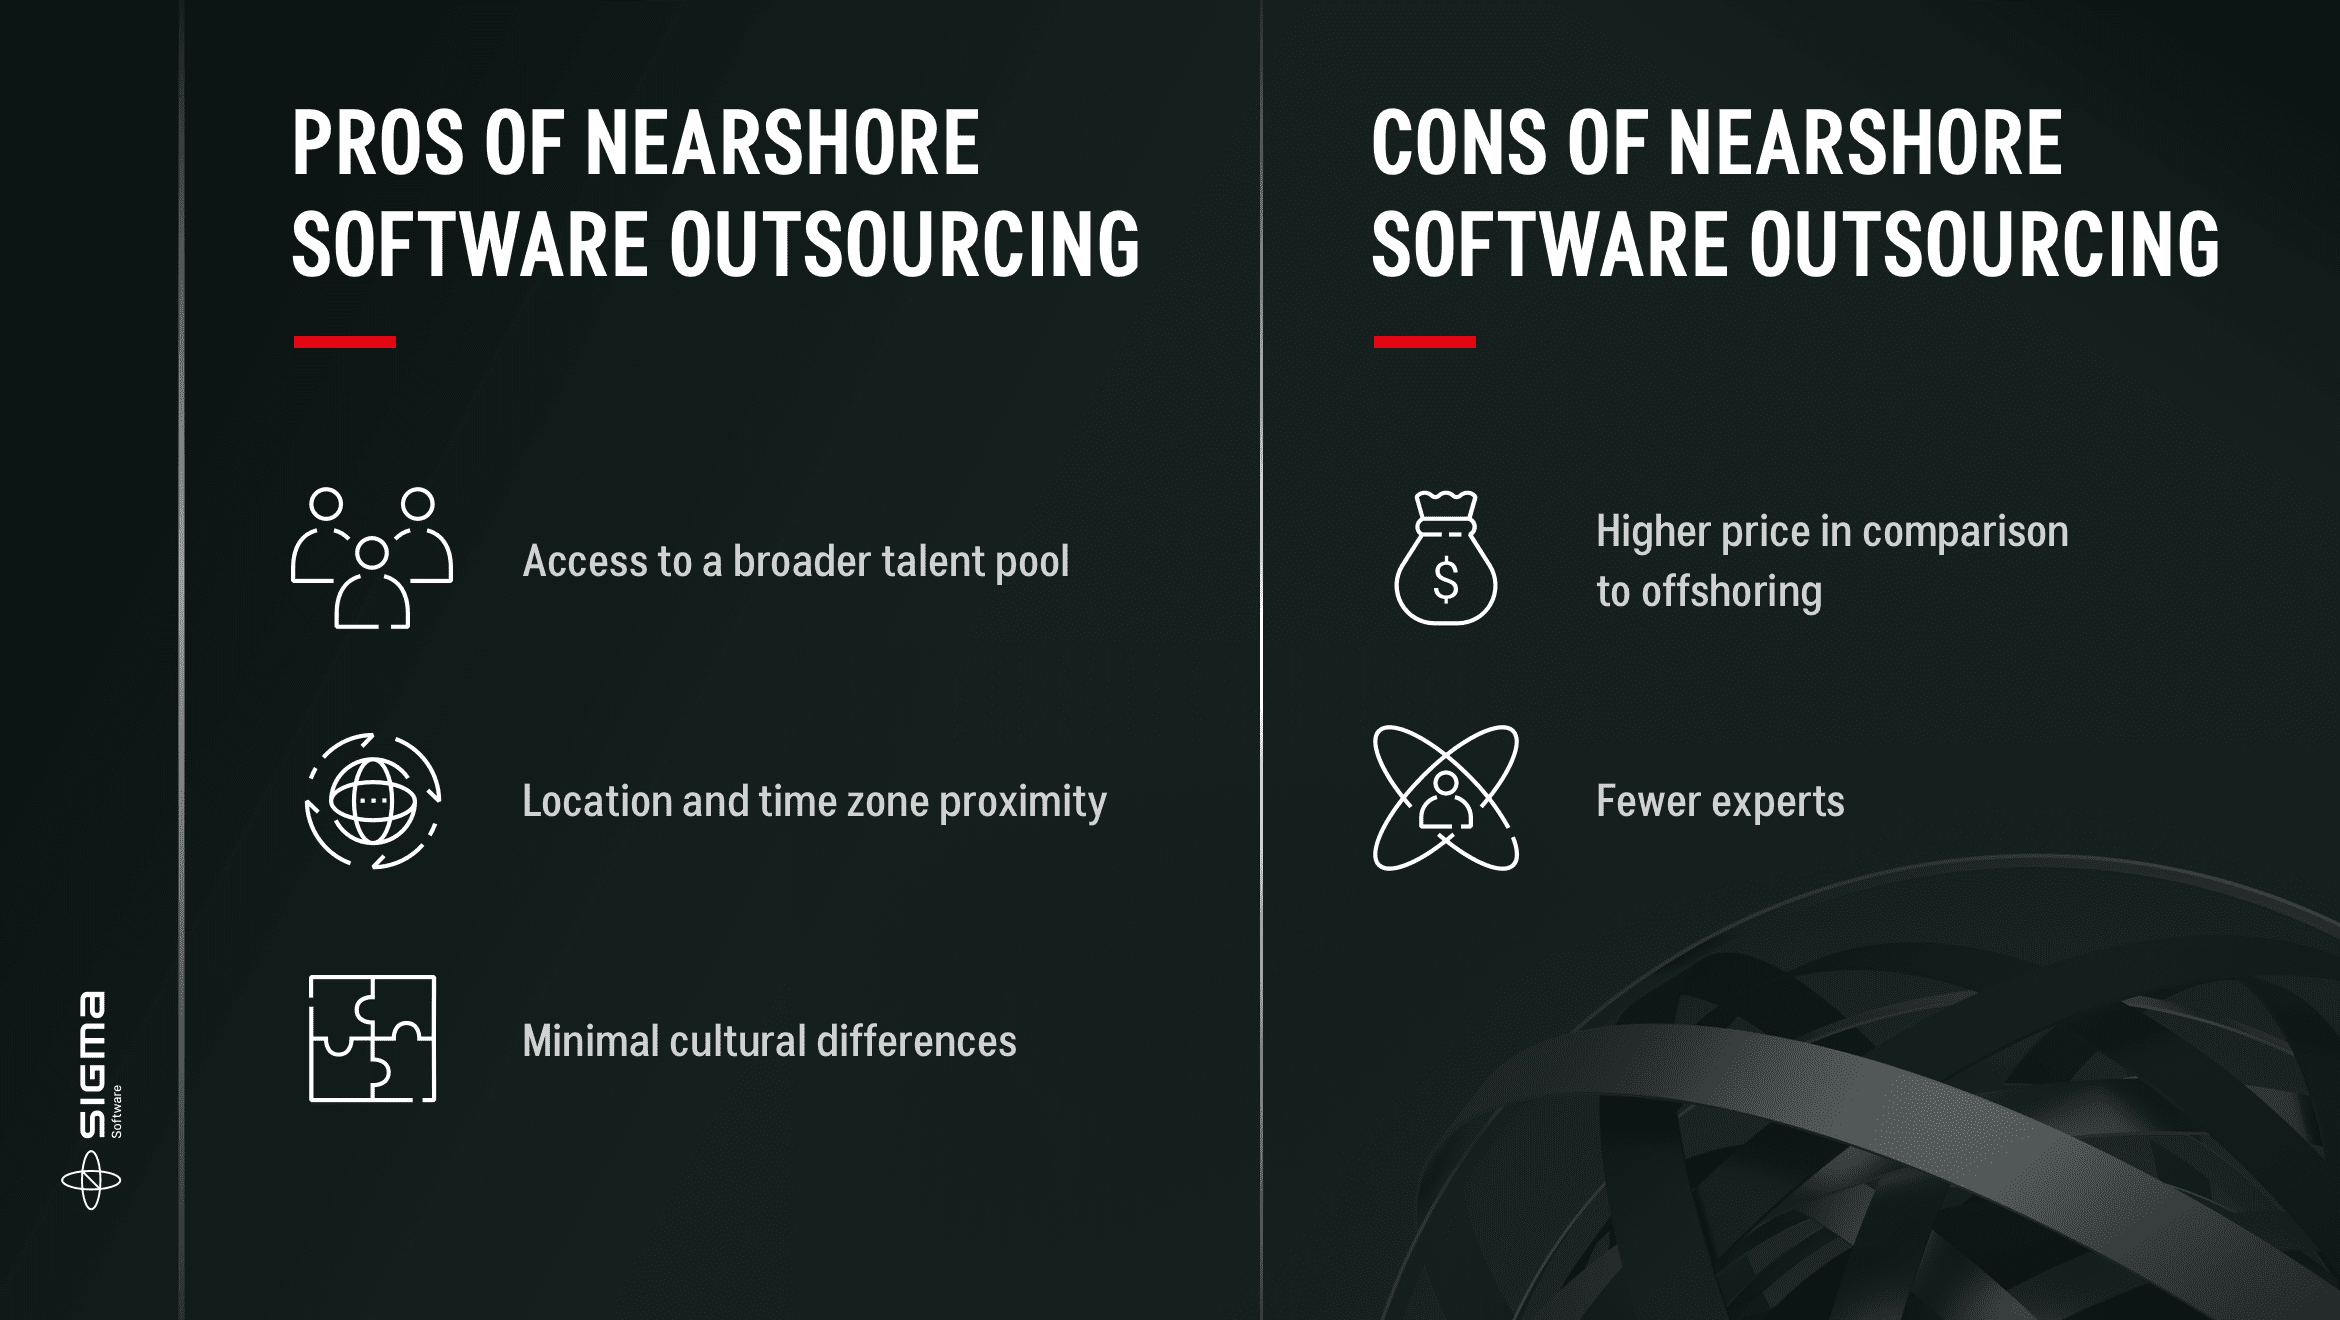 Pros and cons of nearshore outsourcing